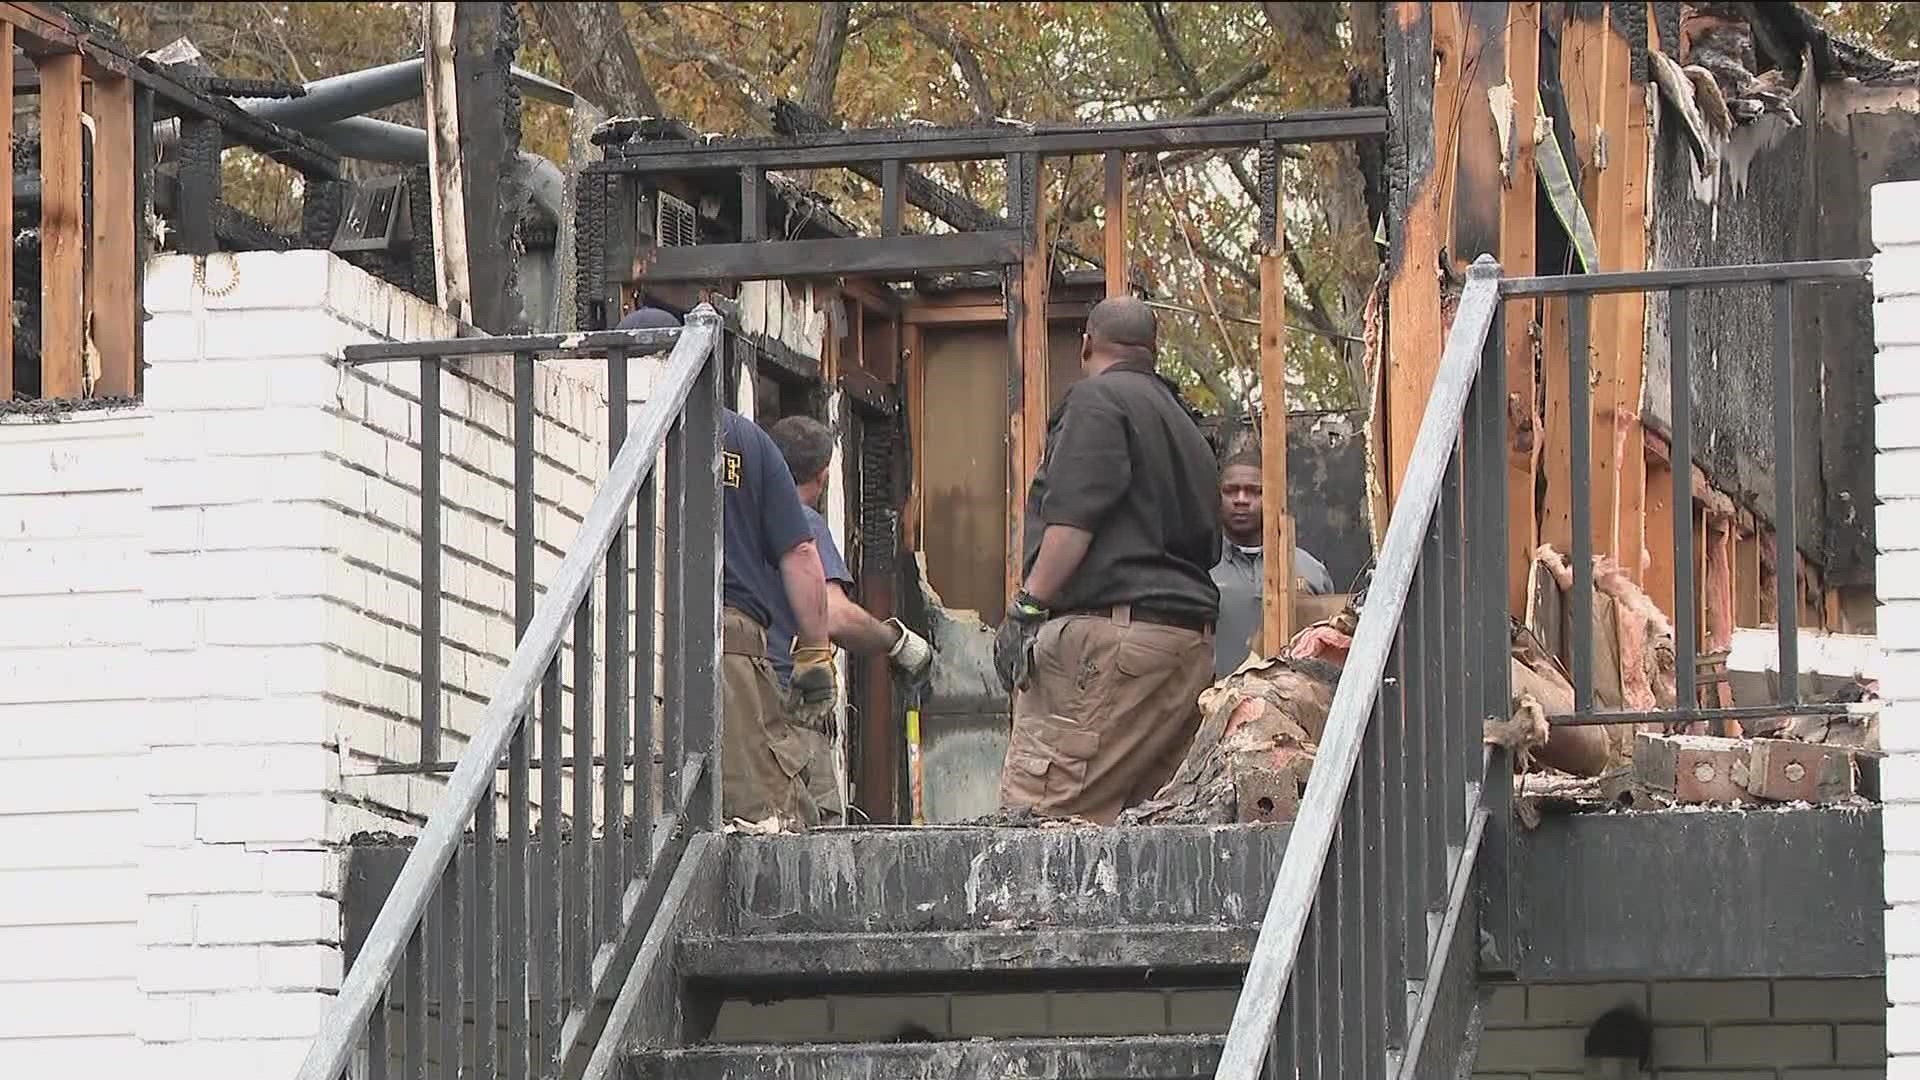 According to the East Point police, 27-year-ol Nicole Ashley Jackson, was arrested and booked in connection to the fire.